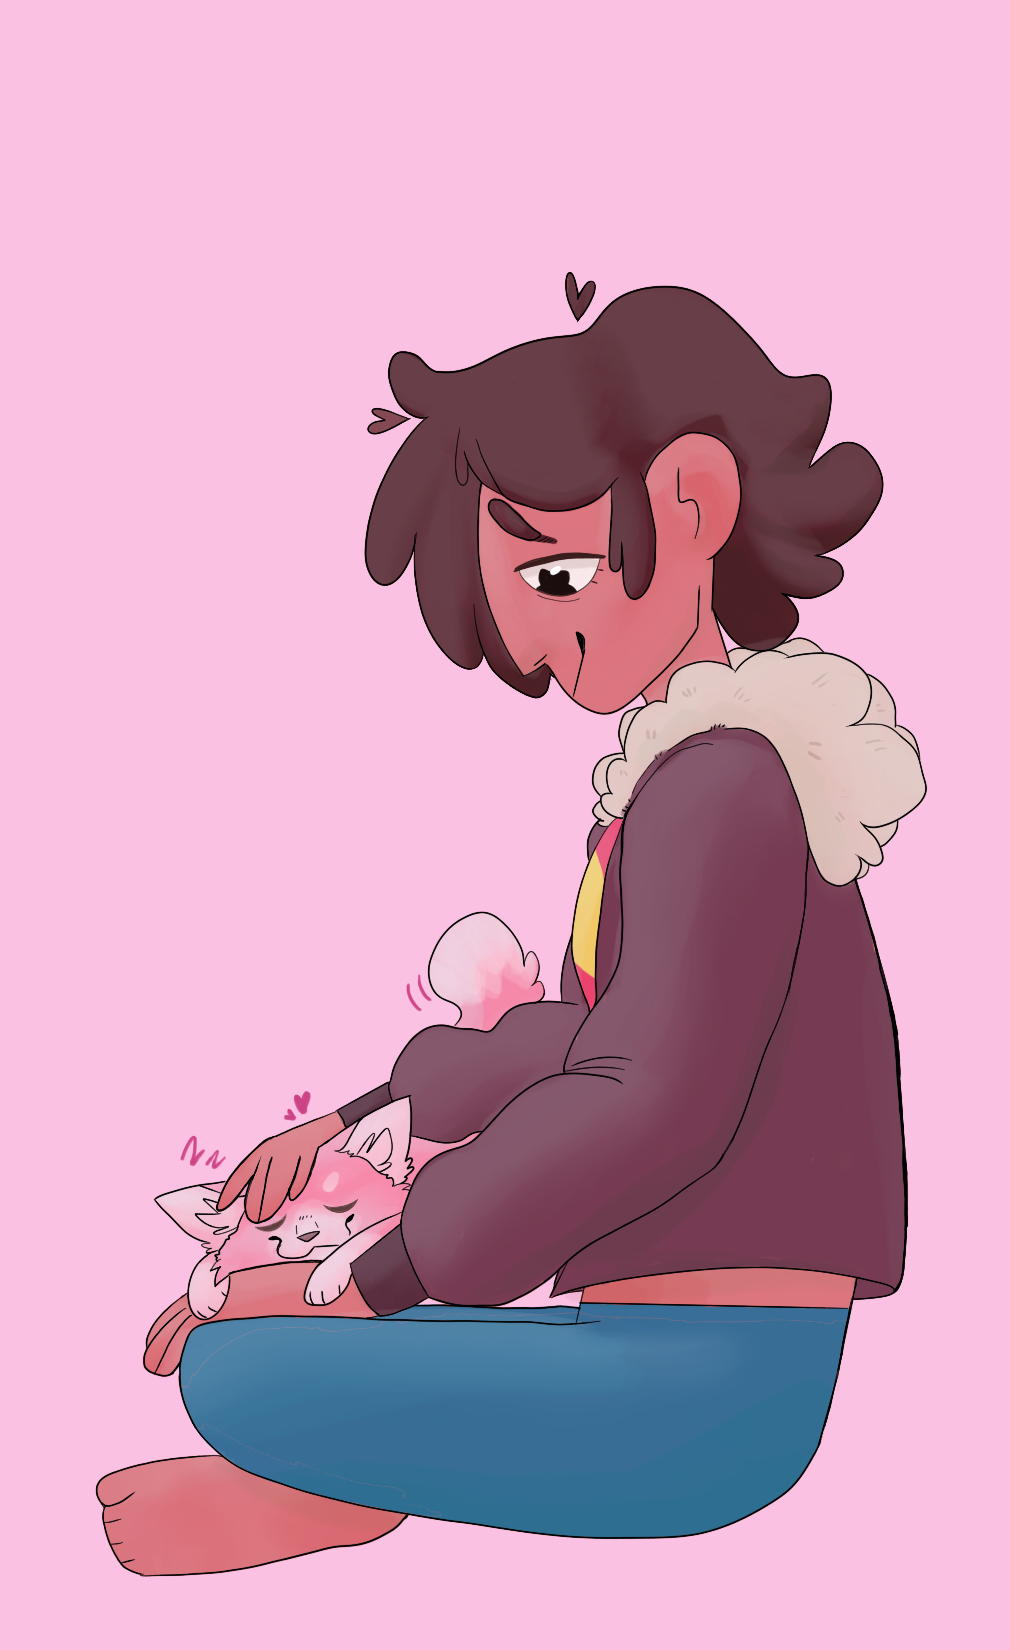 A little Stevonnie Doodle in an au where Steven saved a street cat with his powers and adopted him!